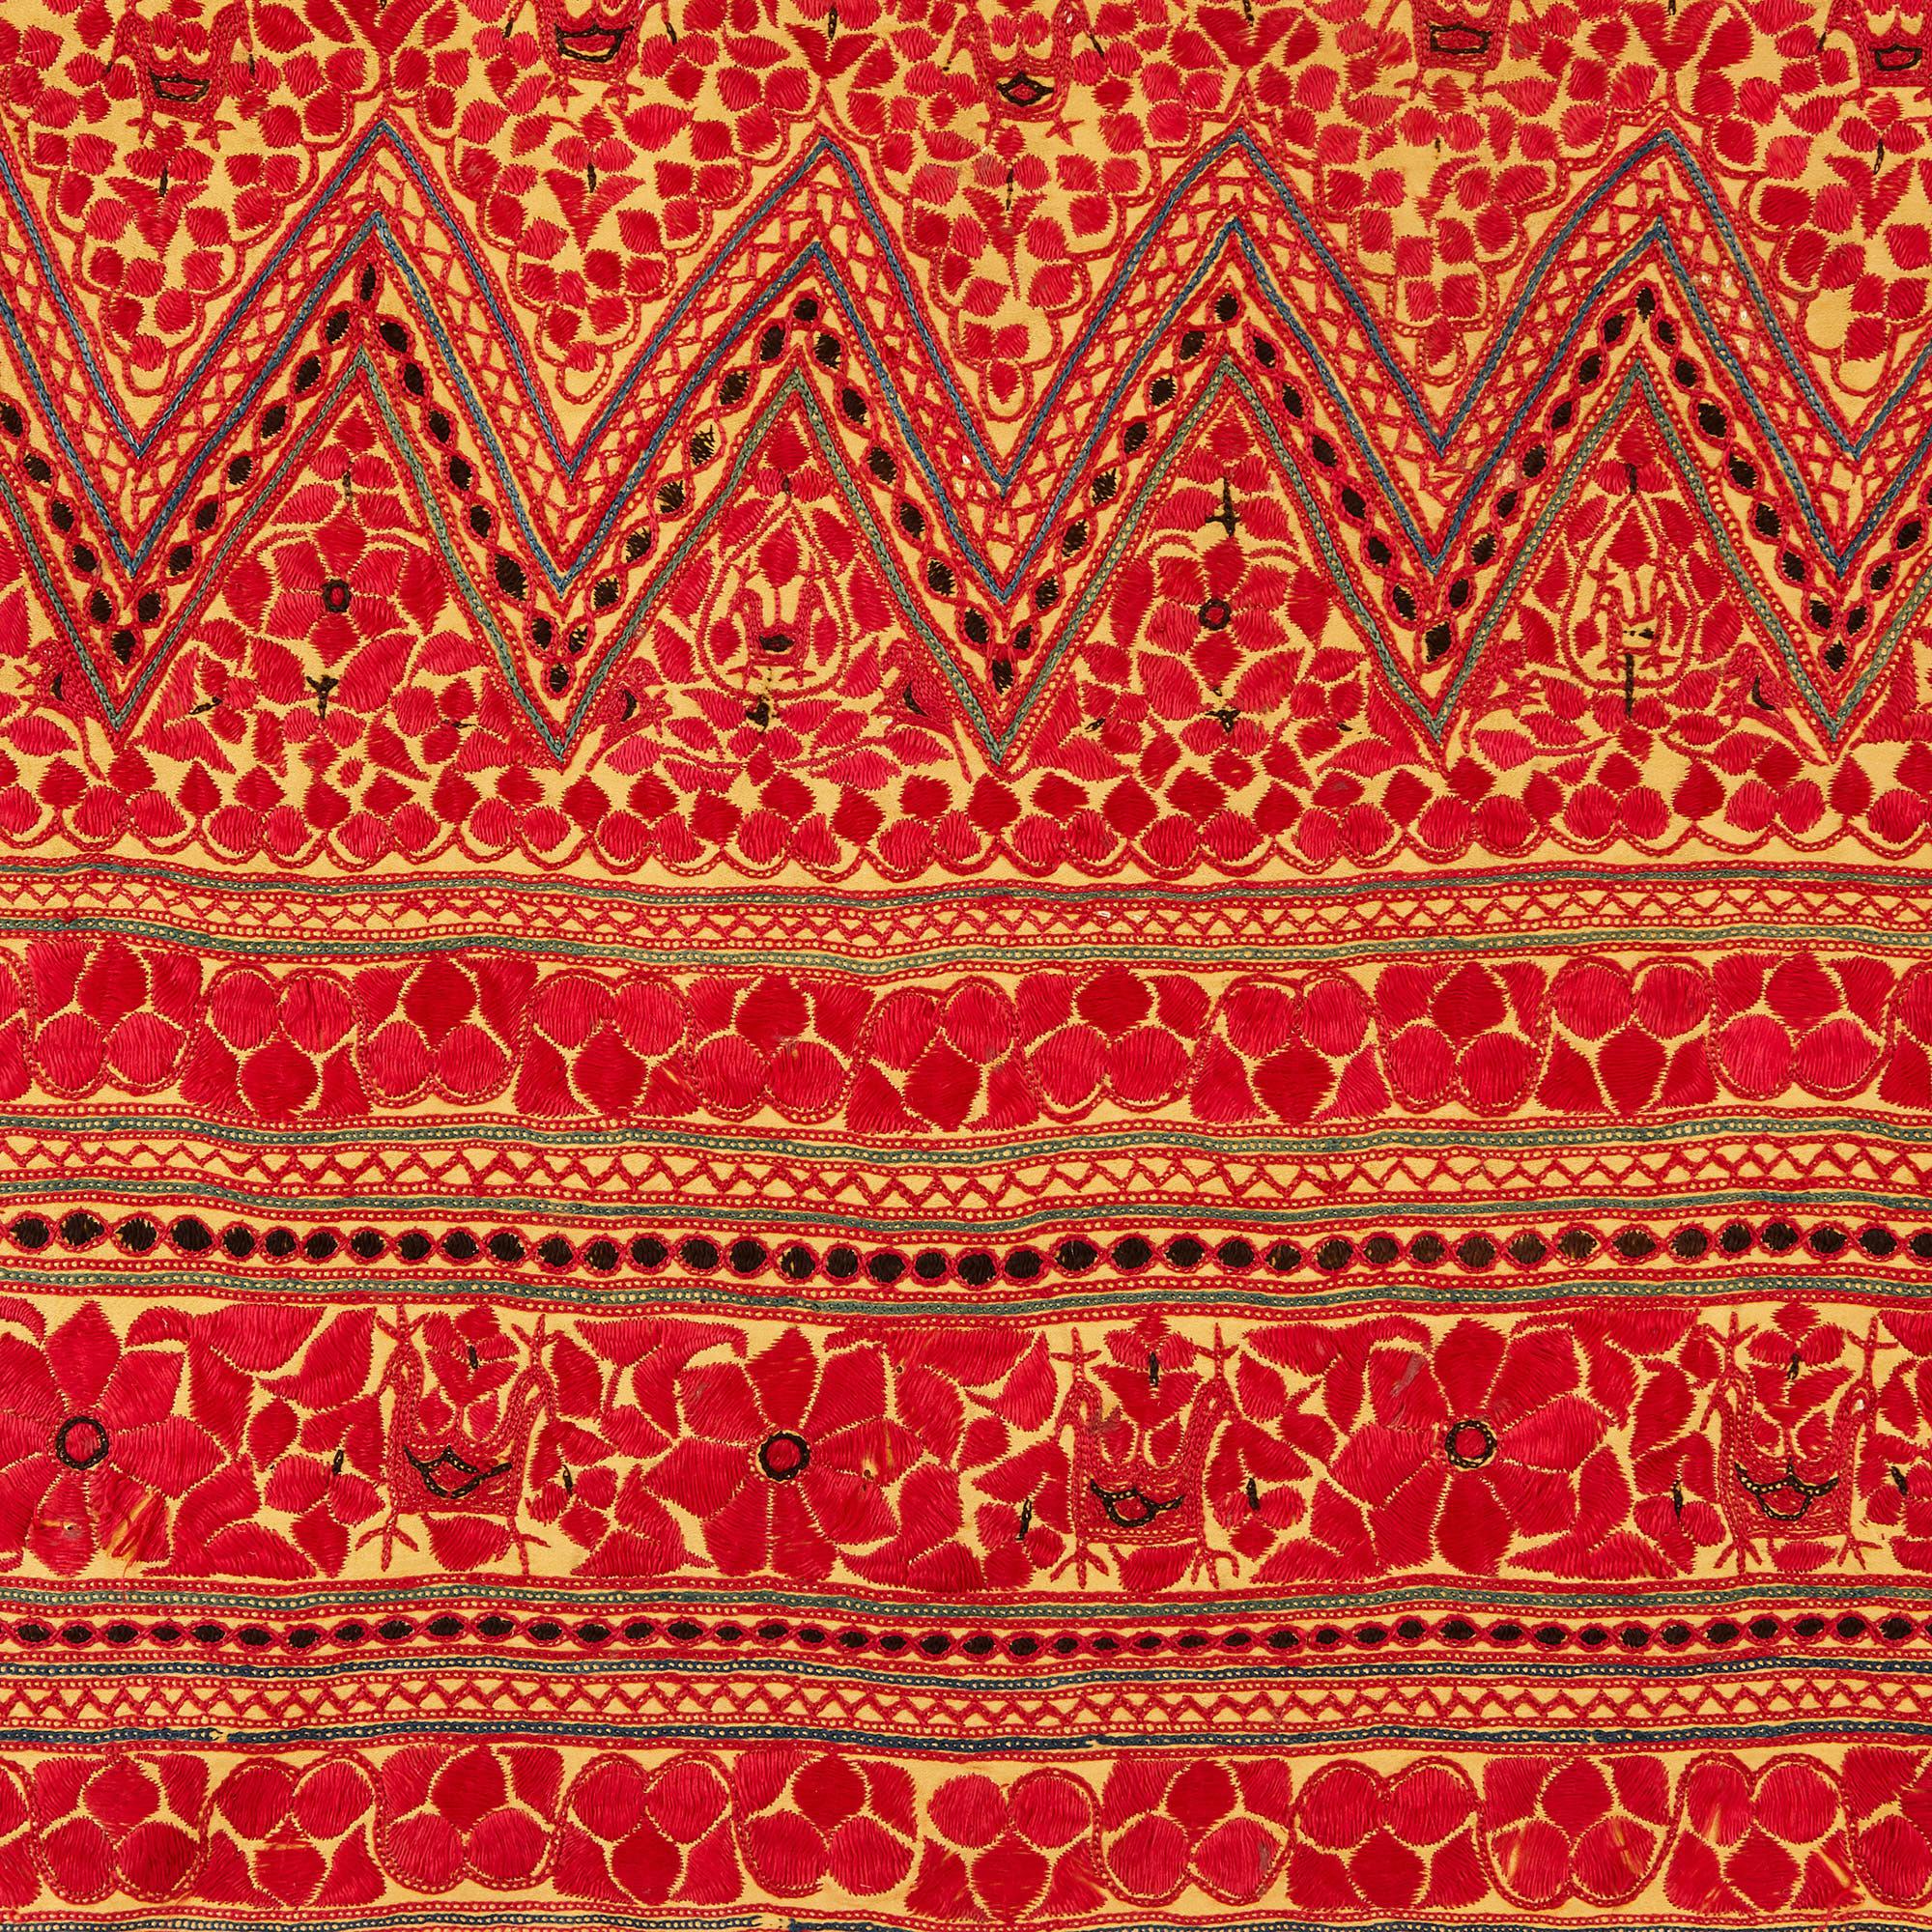 This beautiful embroidered band—which is designed to form part of a skirt or dress—was created in India in the early 19th Century. It is an exquisite piece of craftsmanship, which will be appreciated by anyone who loves fashion and textiles. 

The